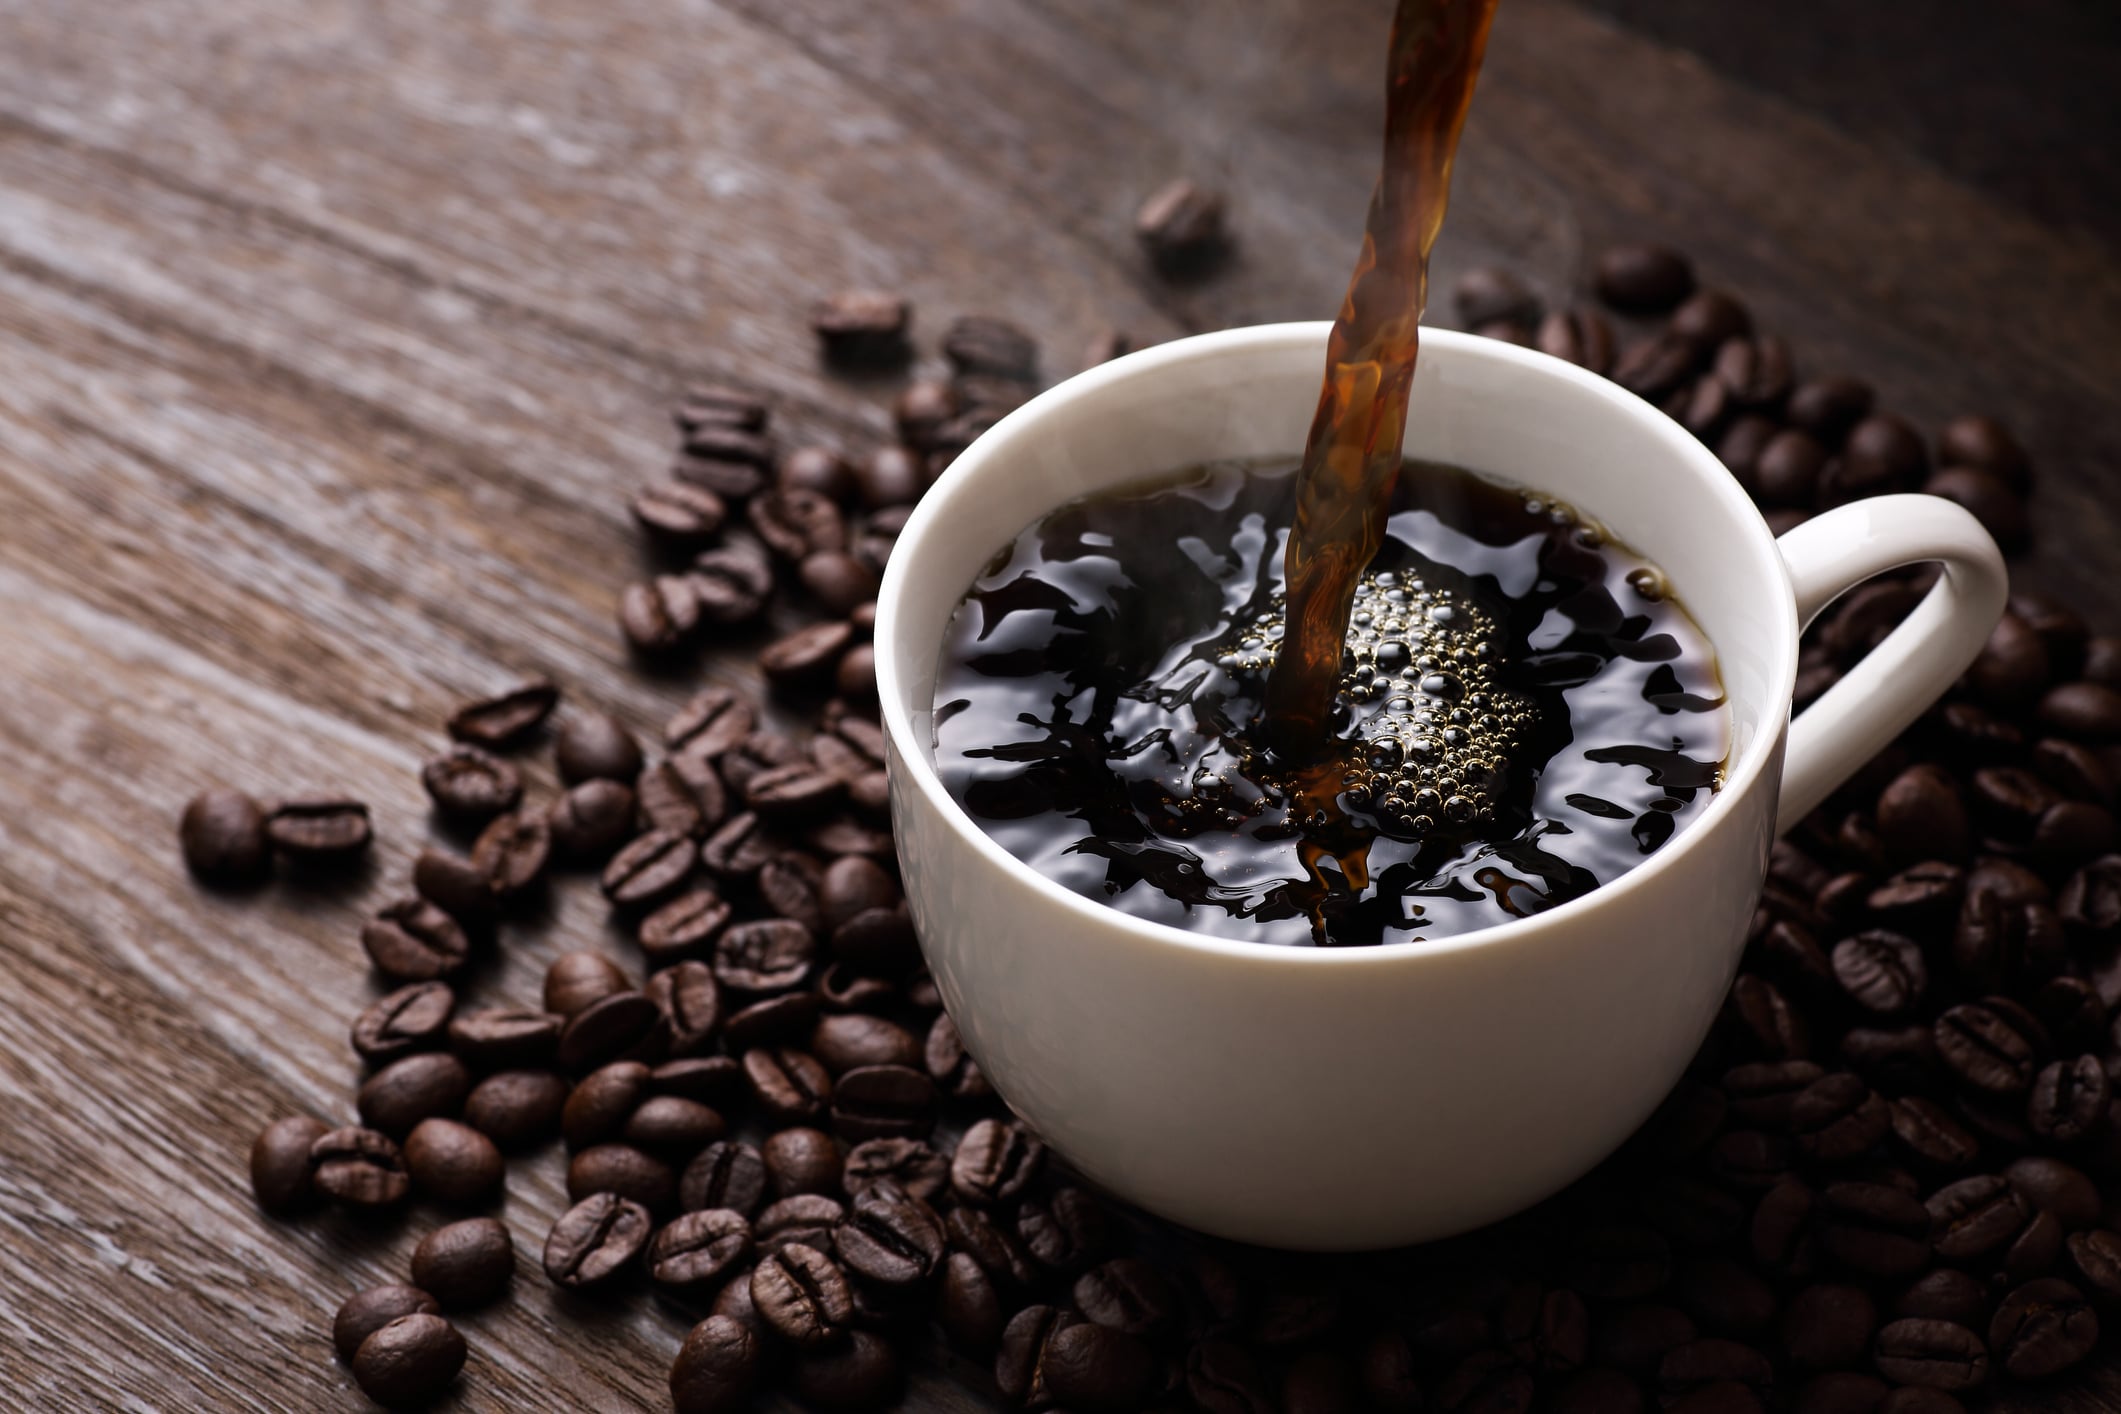 Toxins in Coffee: 8 Sources of Harmful Chemicals in Your Morning Brew